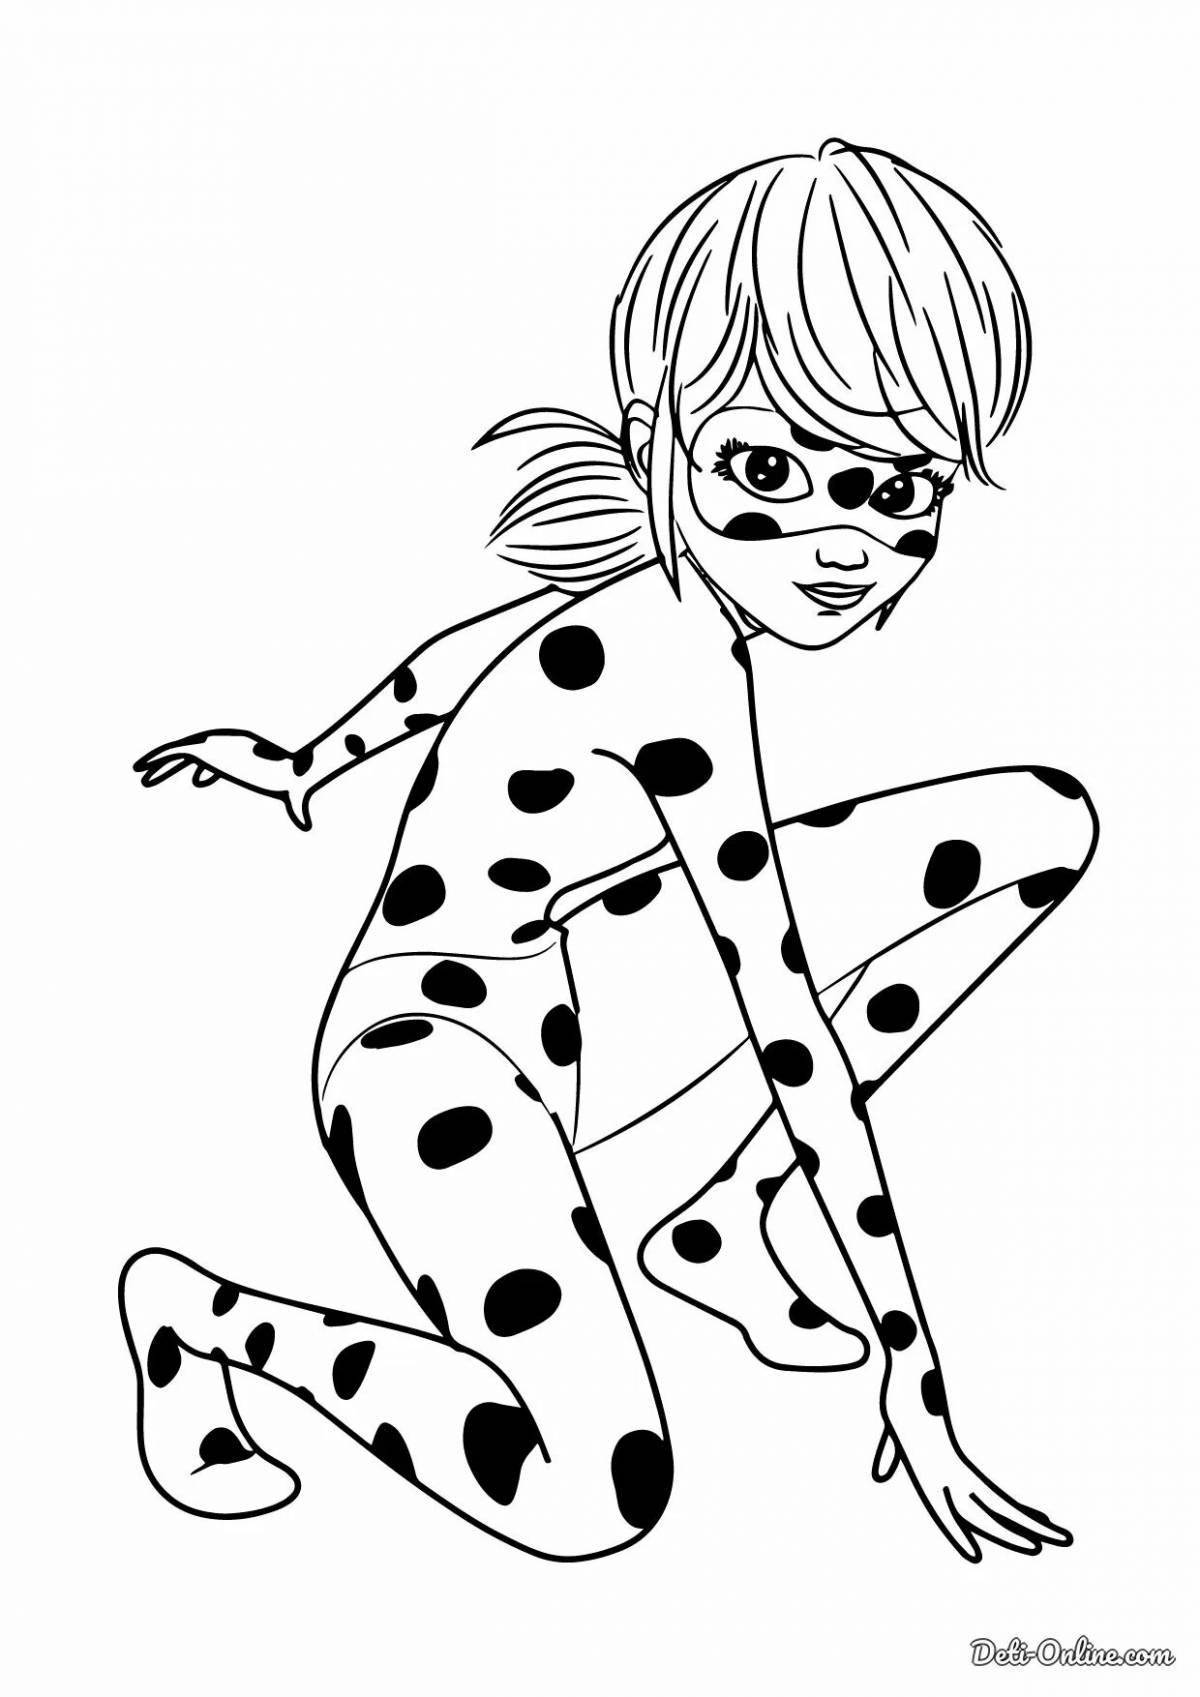 Coloring page charming lady tank for girls 6-7 years old